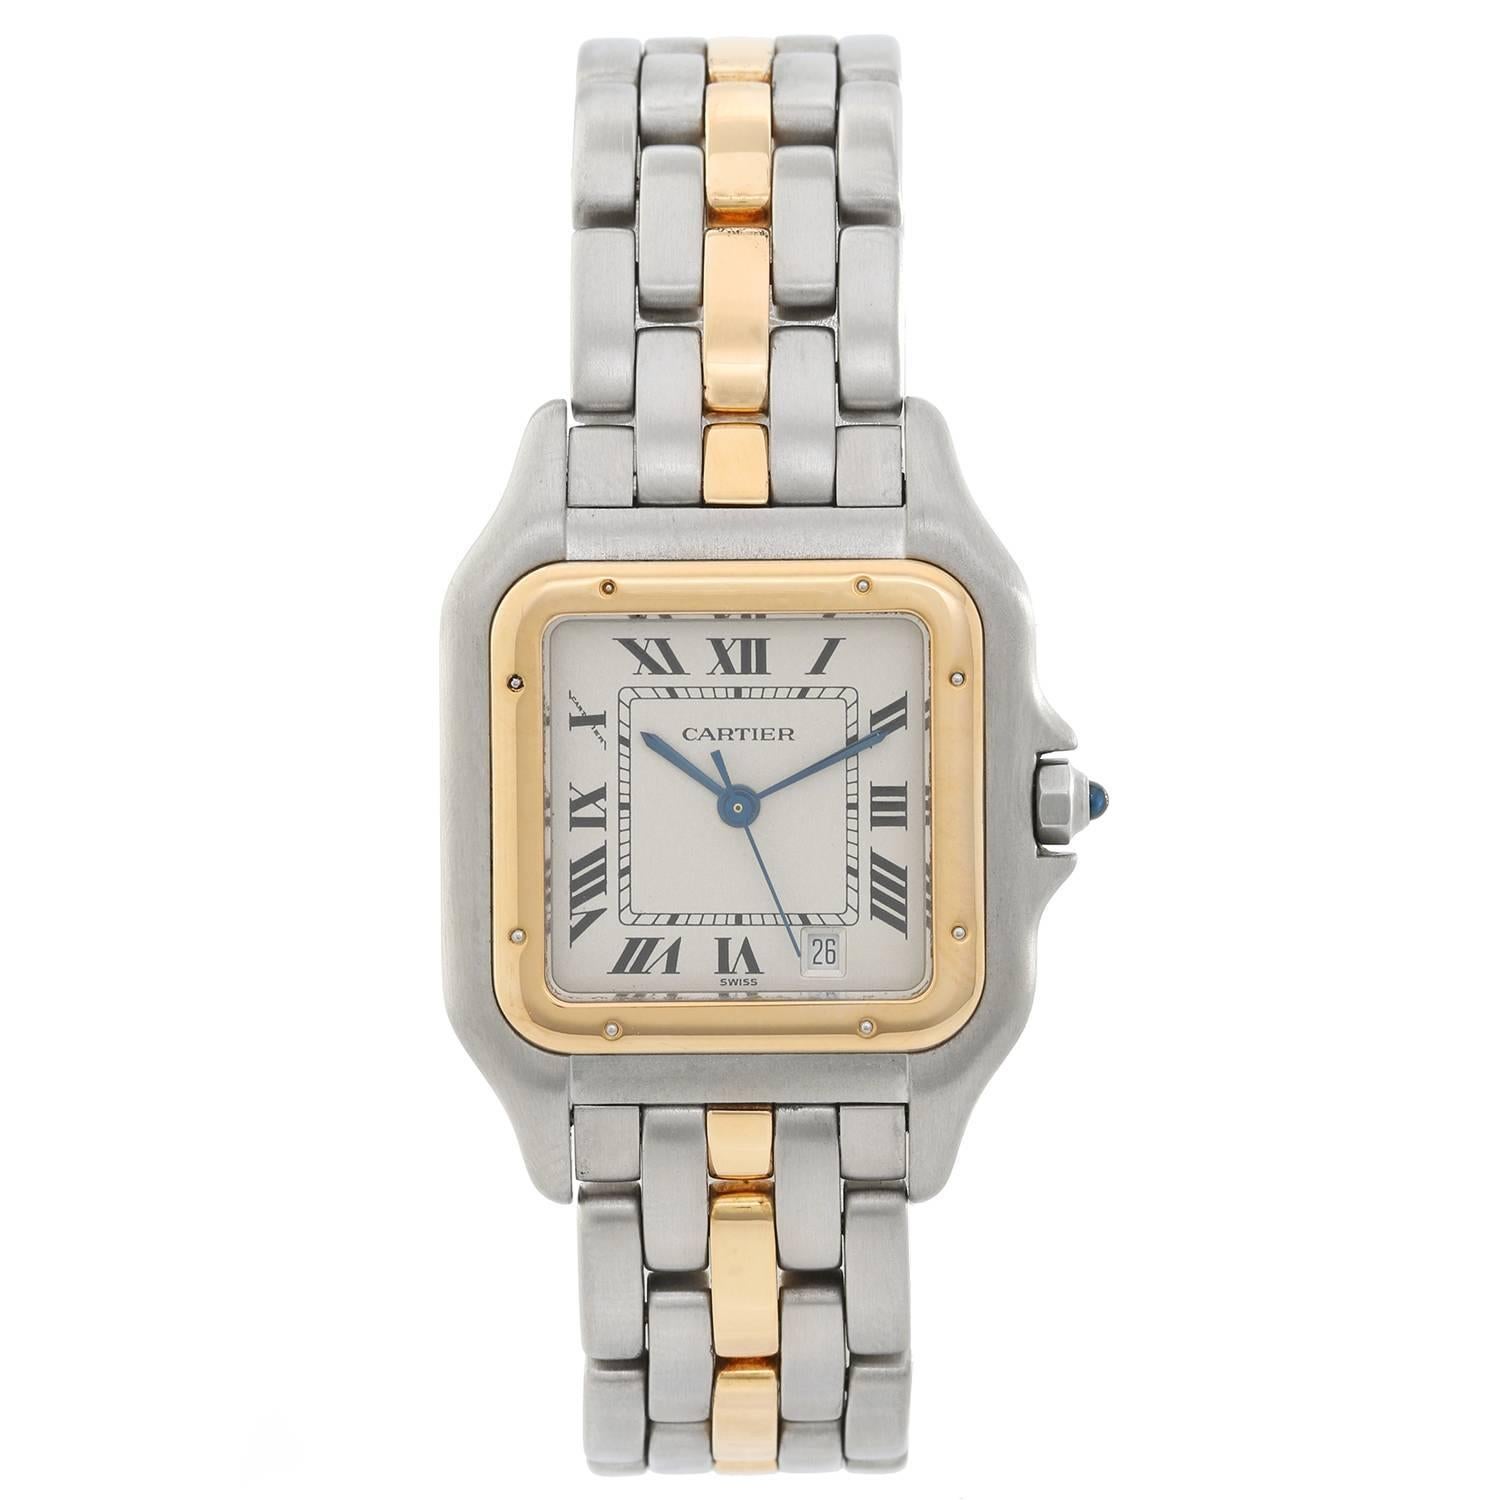 Cartier Panther Ladies 2-Tone Steel & Gold Panthere Watch -  Quartz. Stainless steel case with 18k yellow gold bezel (21mm x 30mm). Ivory colored dial with black Roman numerals. Stainless steel Panthere bracelet with 1-row of 18k yellow gold links.